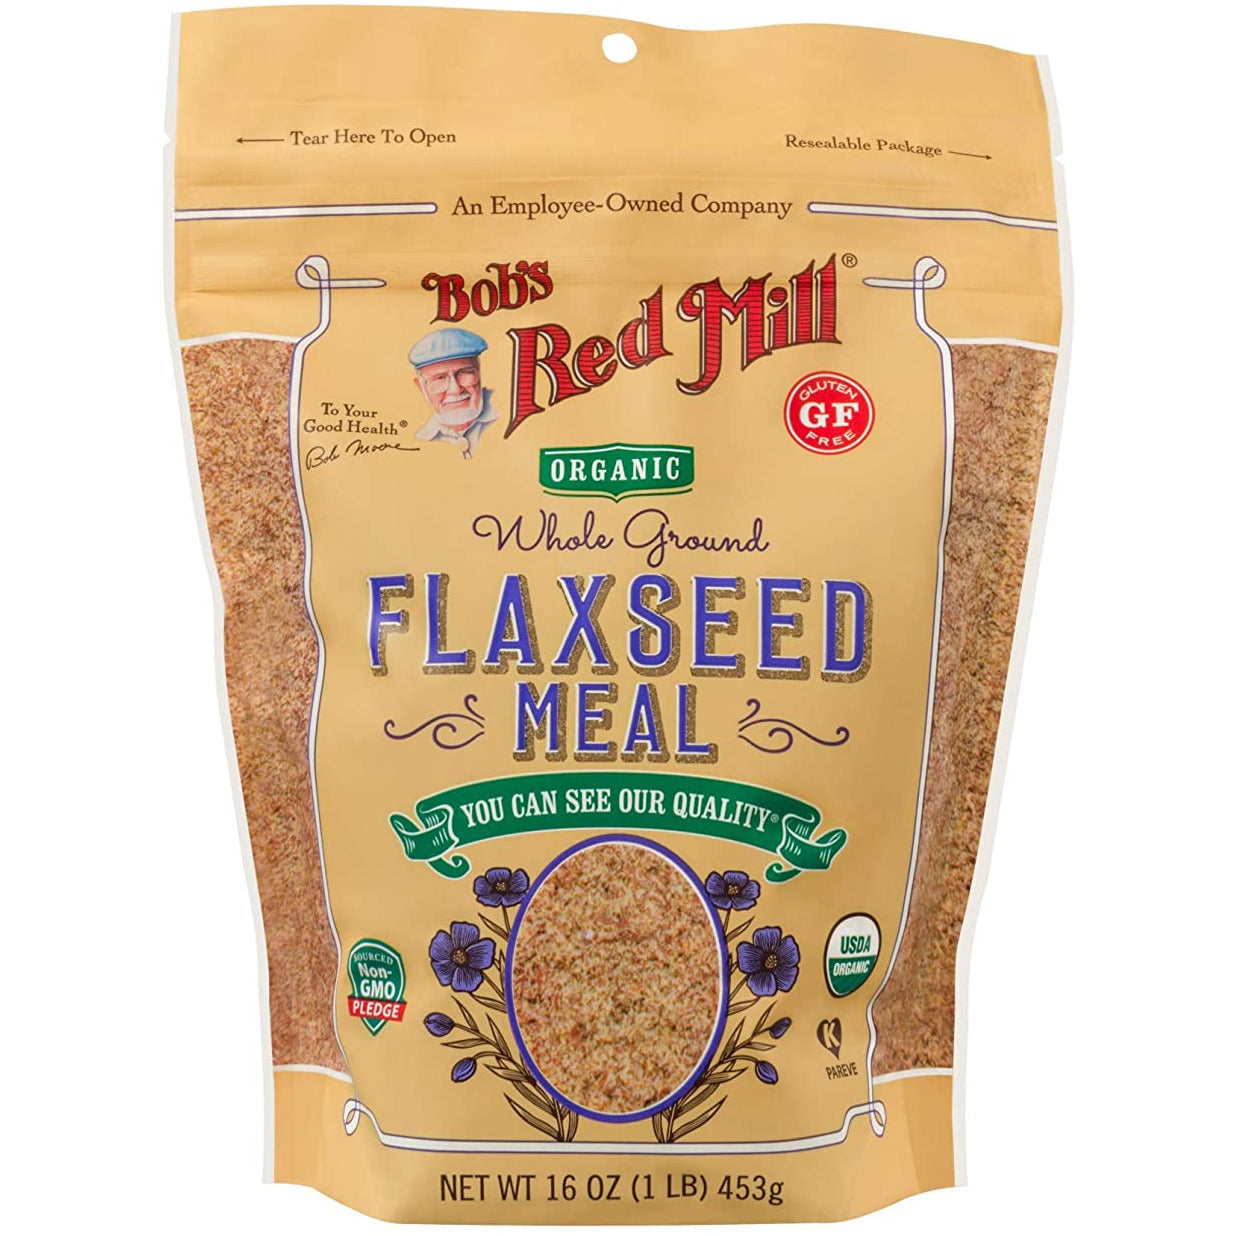 Bob's Red Mill Organic Whole Ground Flaxseed Meal, 16 Oz